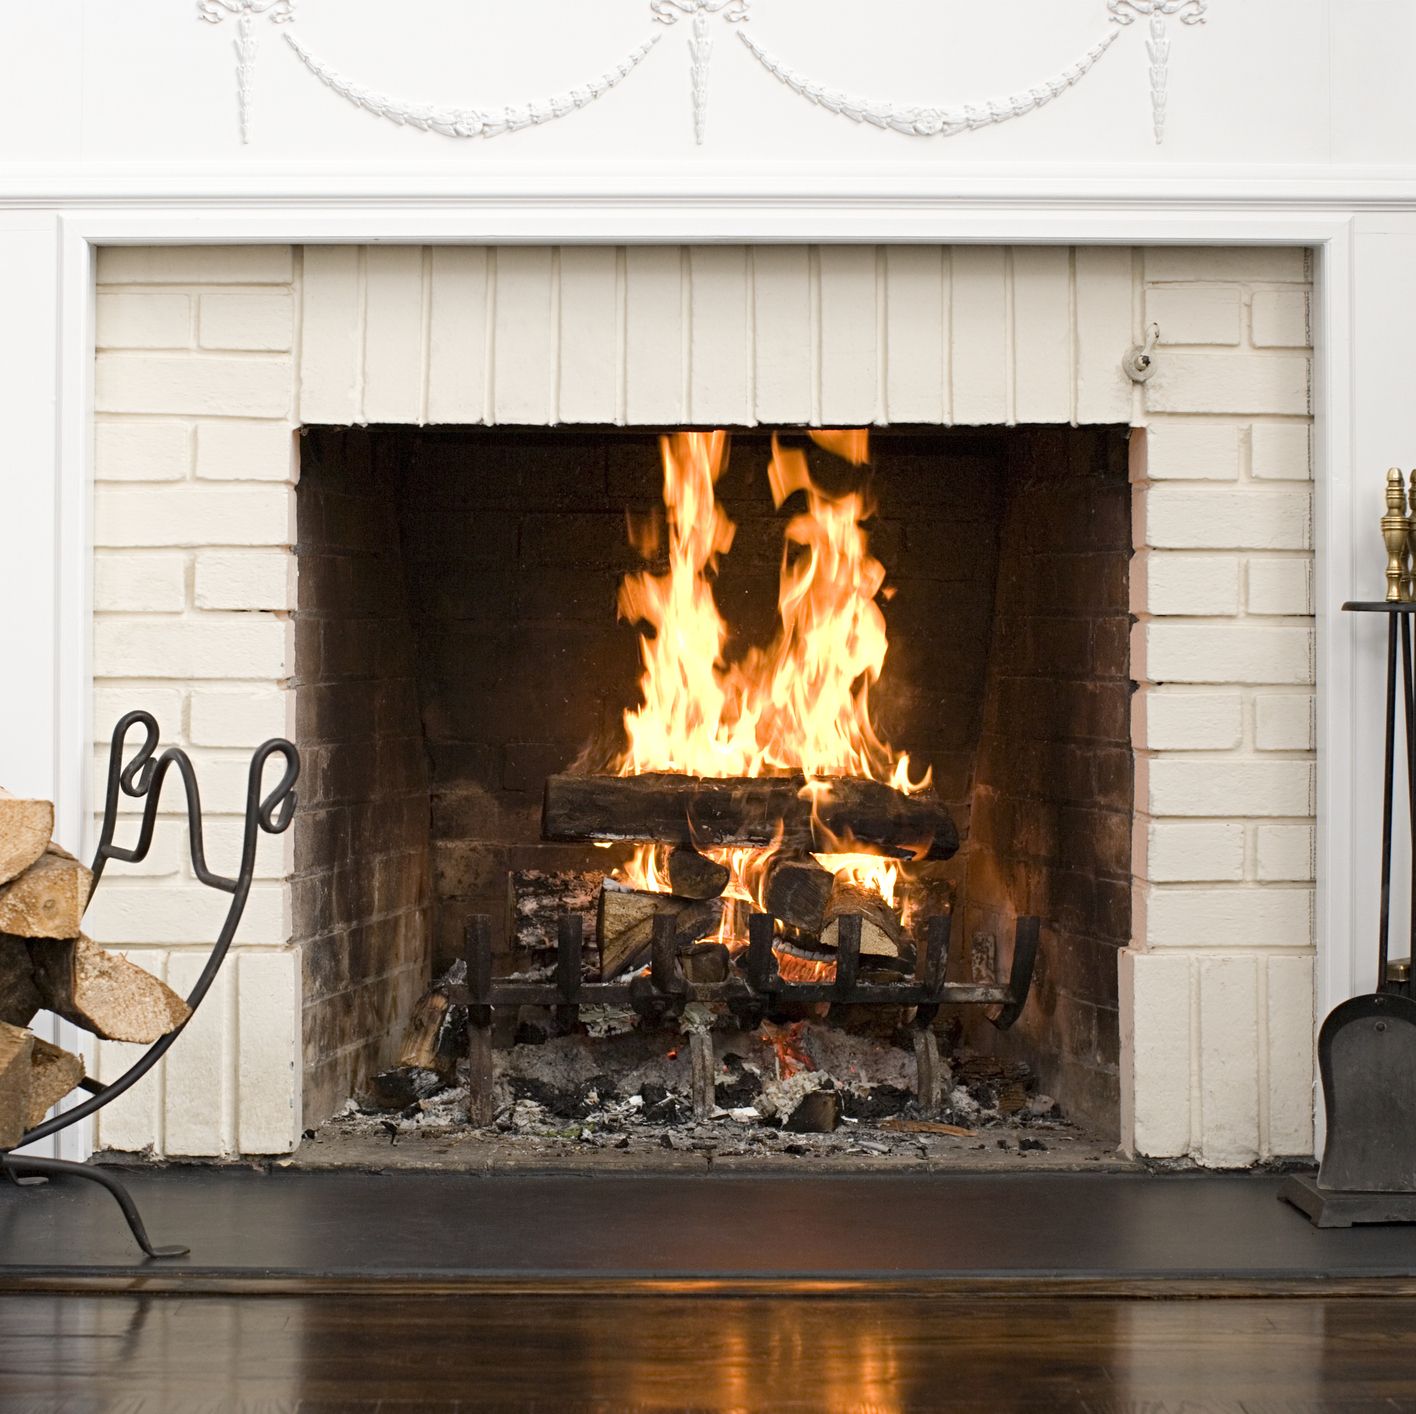 You Need to Clean Your Chimney Yearly. Here's How.